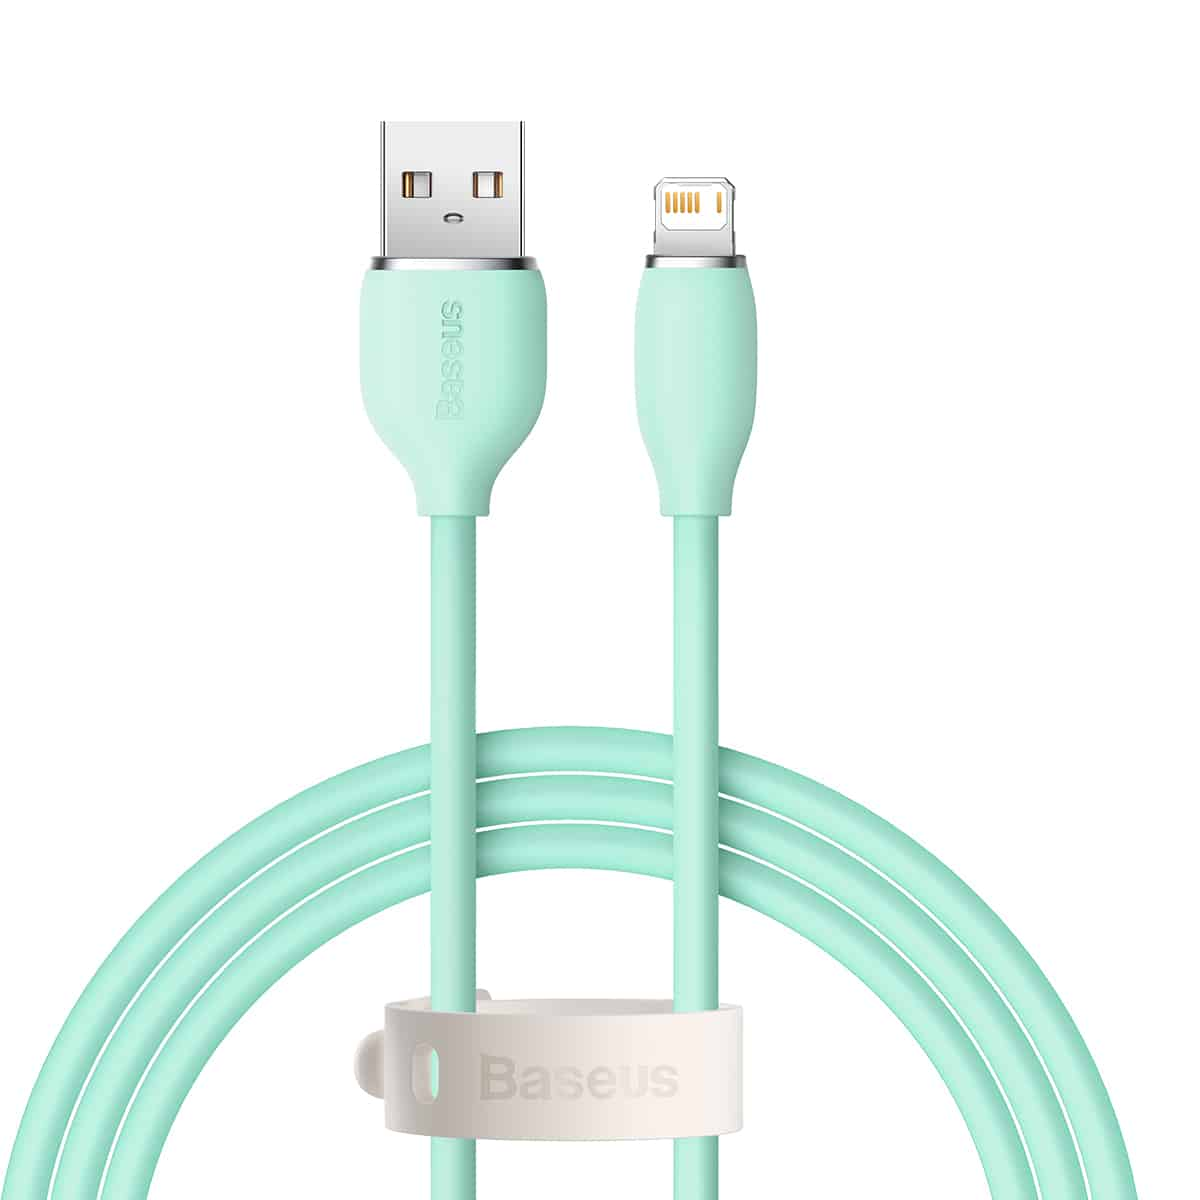 BASEUS JELLY LIQUID SILICA GEL FAST CHARGING DATA CABLE USB TO IPHONE 2.4A 2M - Green